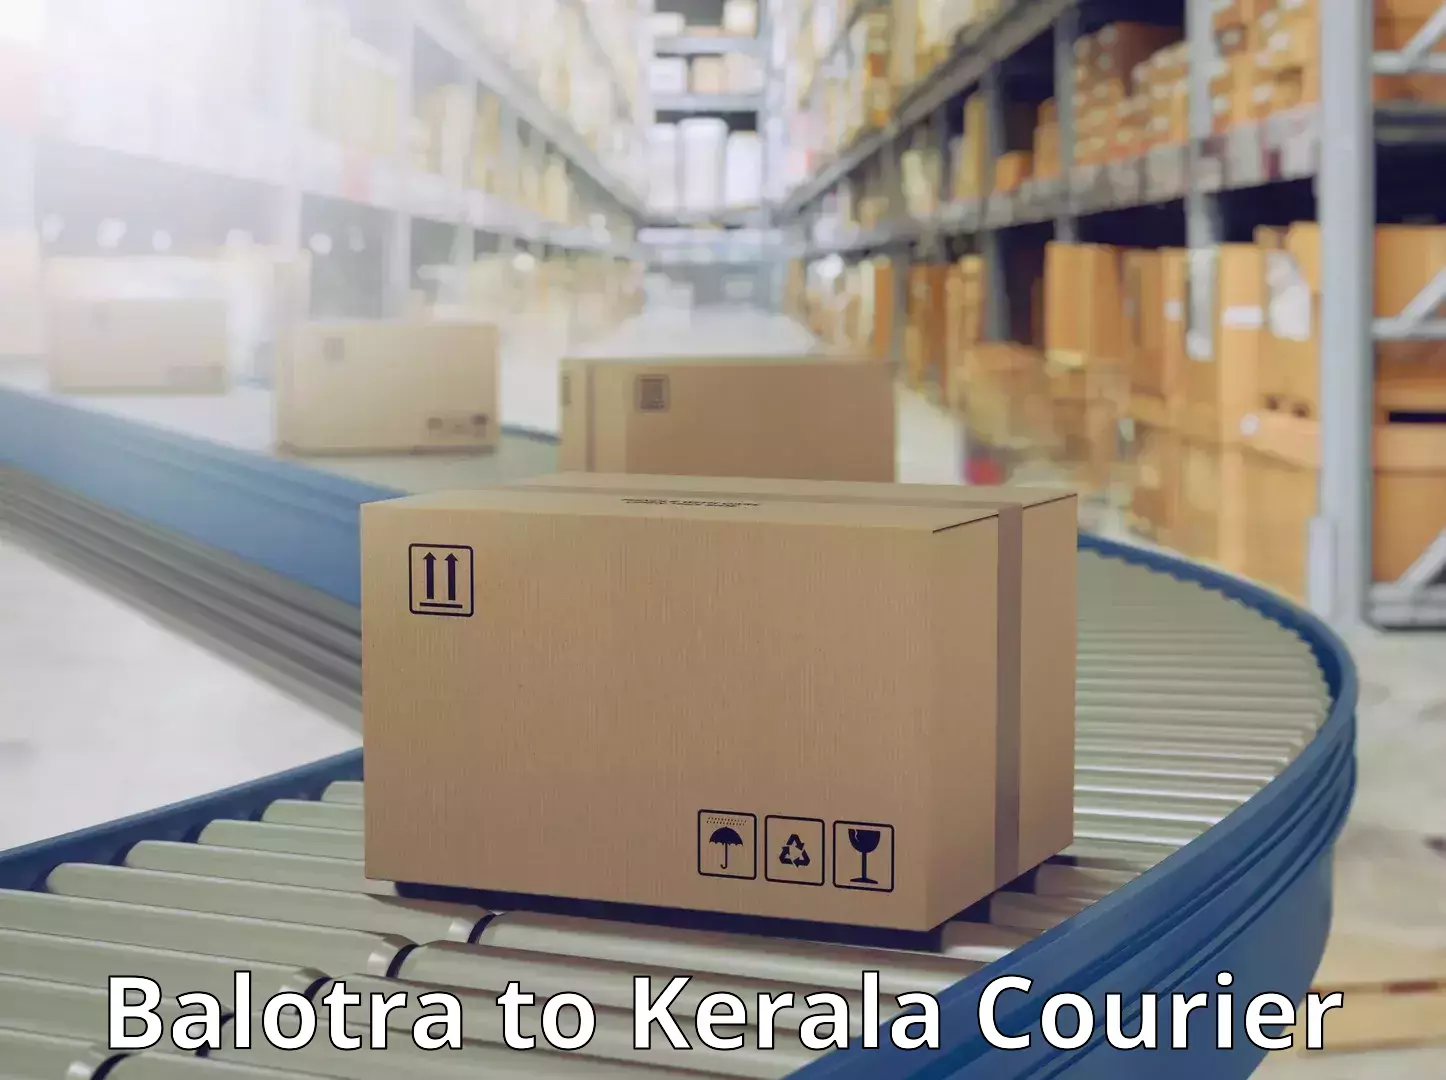 Medical delivery services Balotra to Kerala